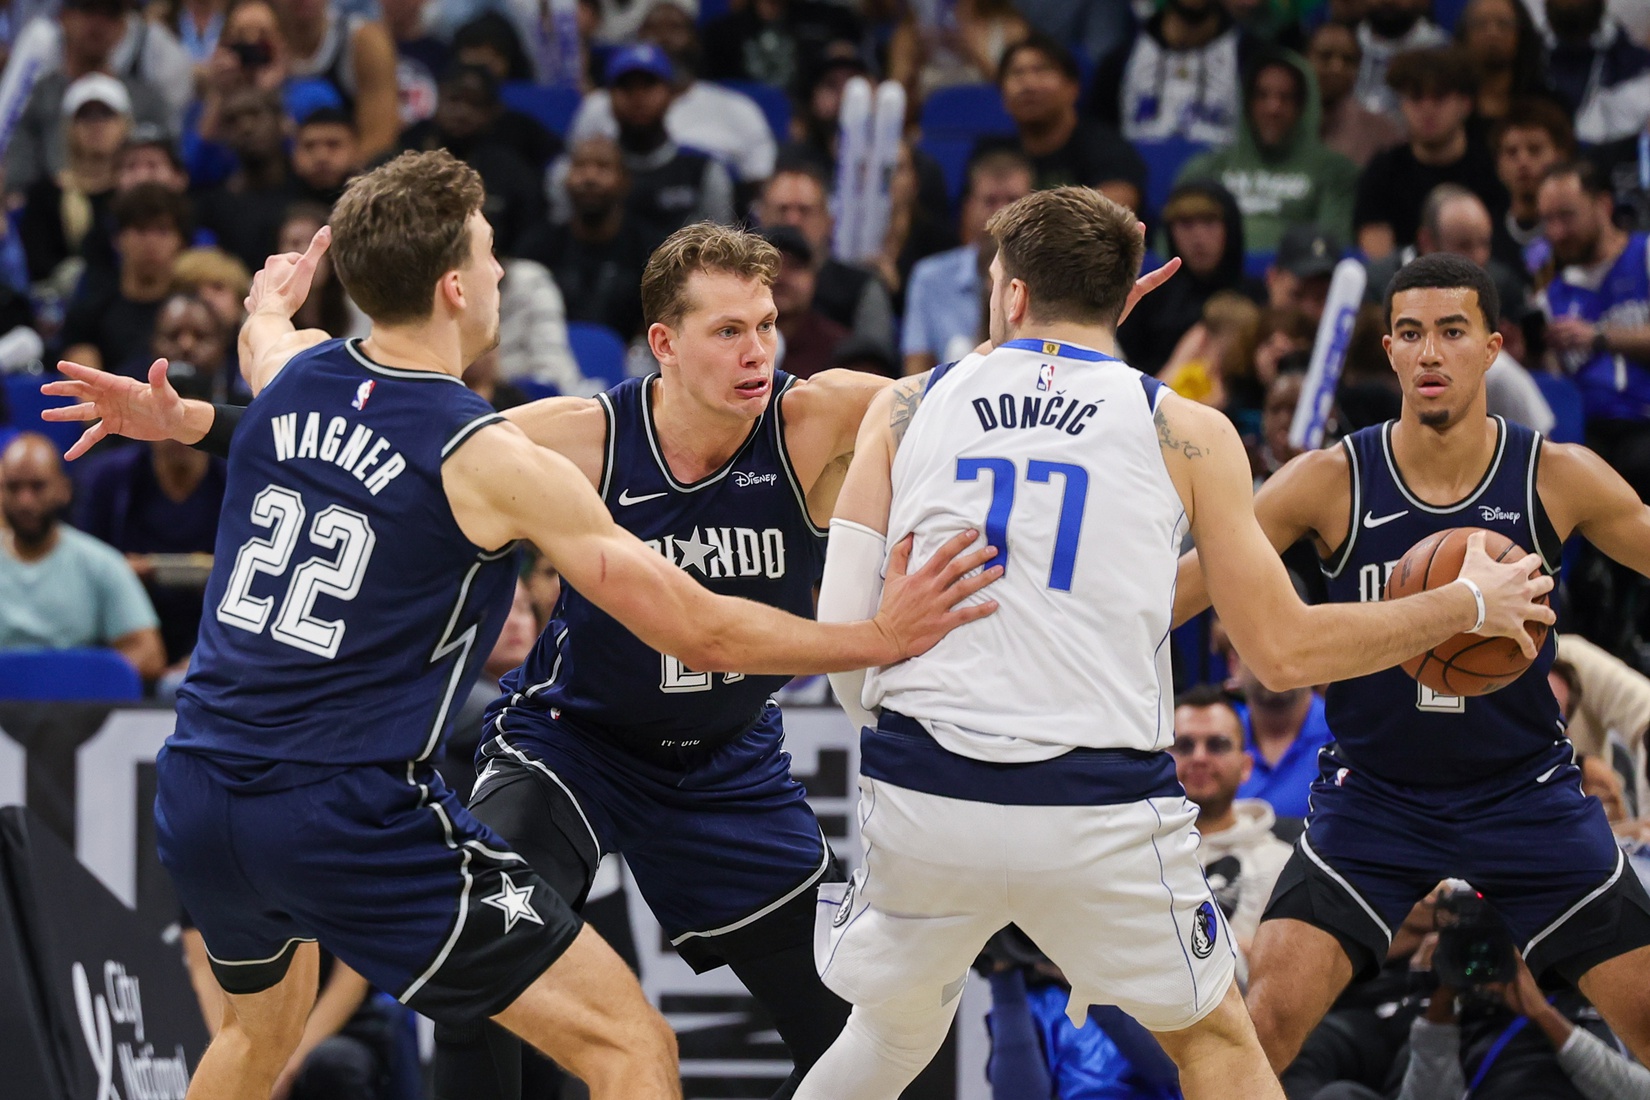 Franz Wagner 1-on-1: Guarding Mavs’ Luka Doncic in NBA & FIBA, Germany’s Success & More